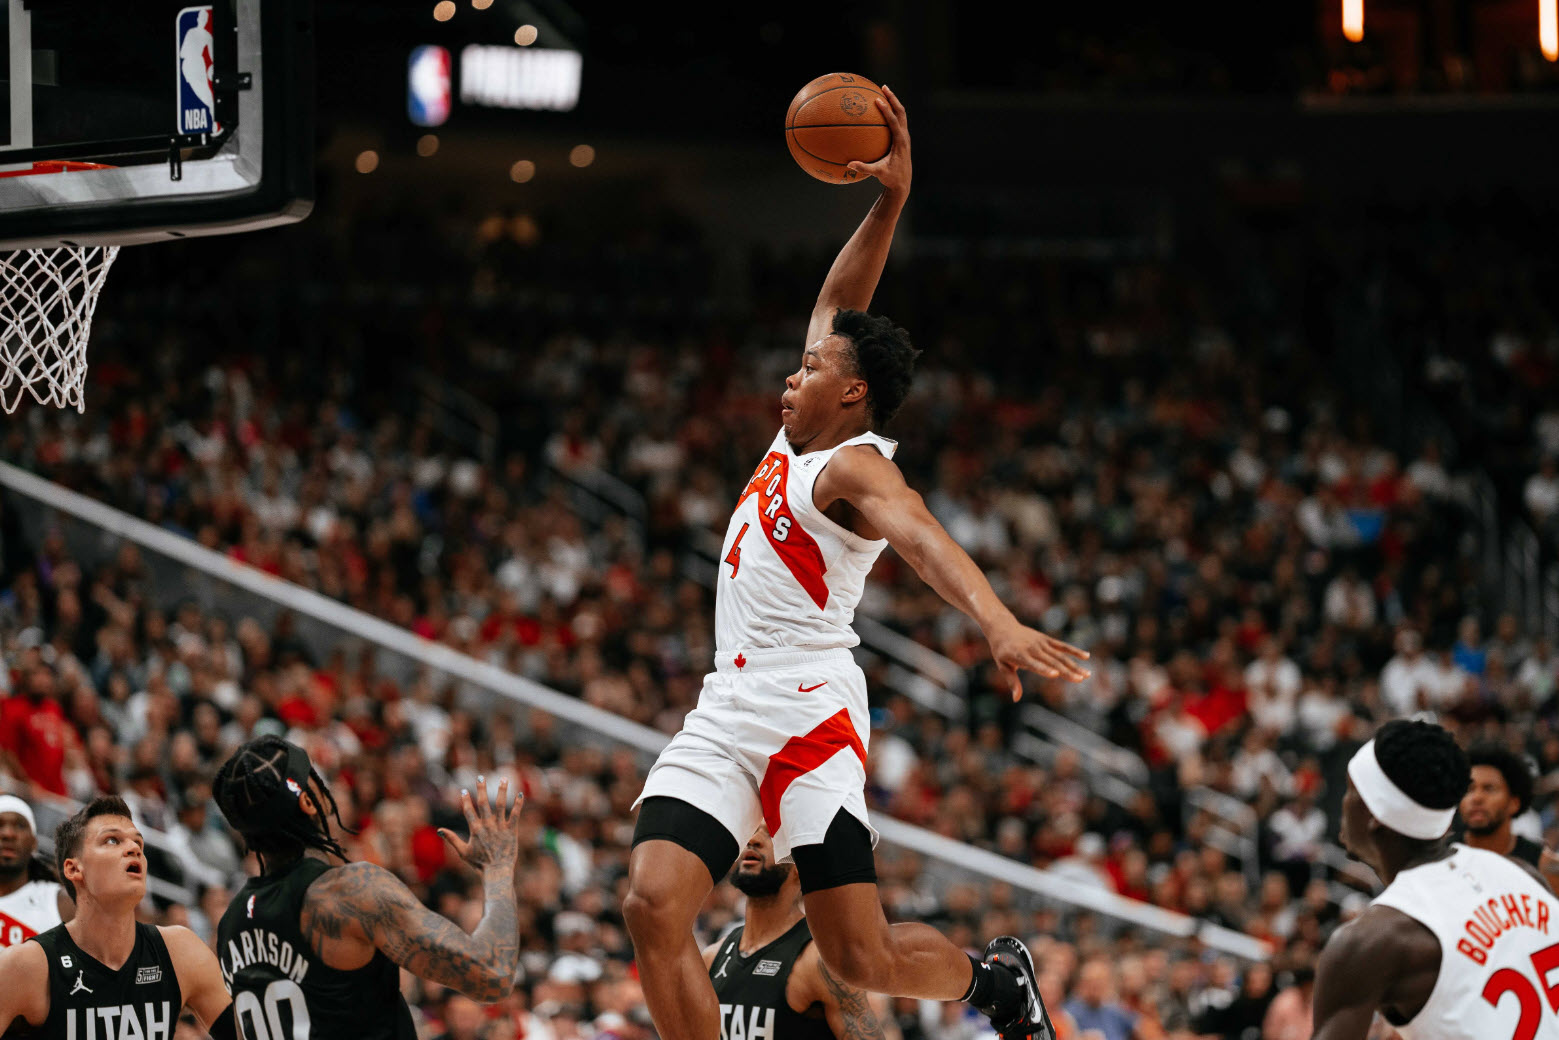 The Toronto Raptors Roster Breakdown: Assessing the Key Players and Potential Lineups